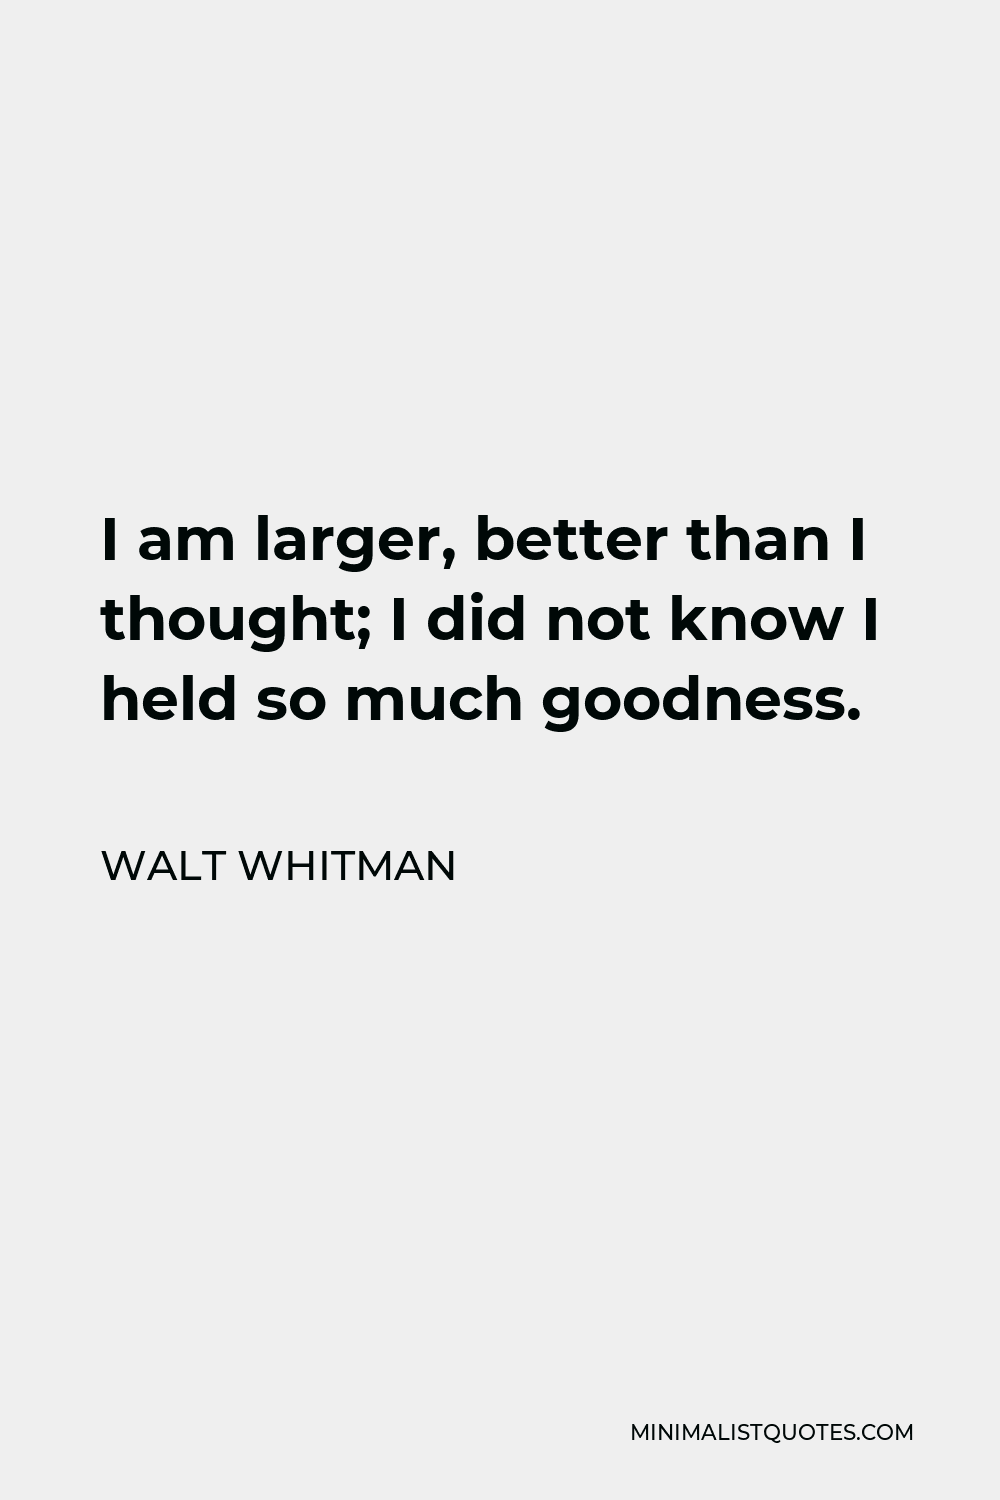 Walt Whitman Quote - I am larger, better than I thought; I did not know I held so much goodness.